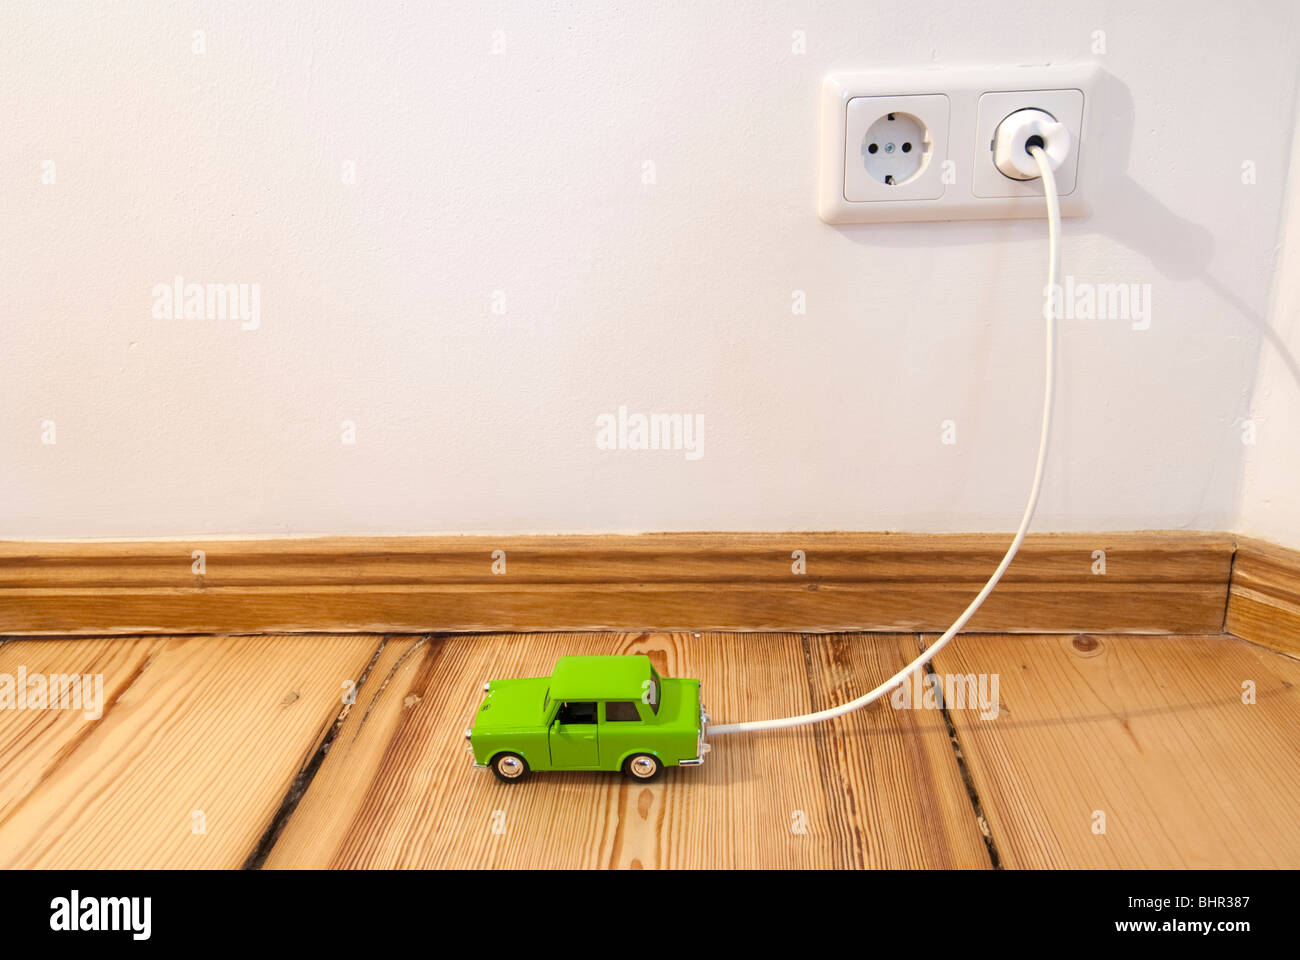 Concept of toy electric car being recharged by plug-in connection to electric supply in the home Stock Photo